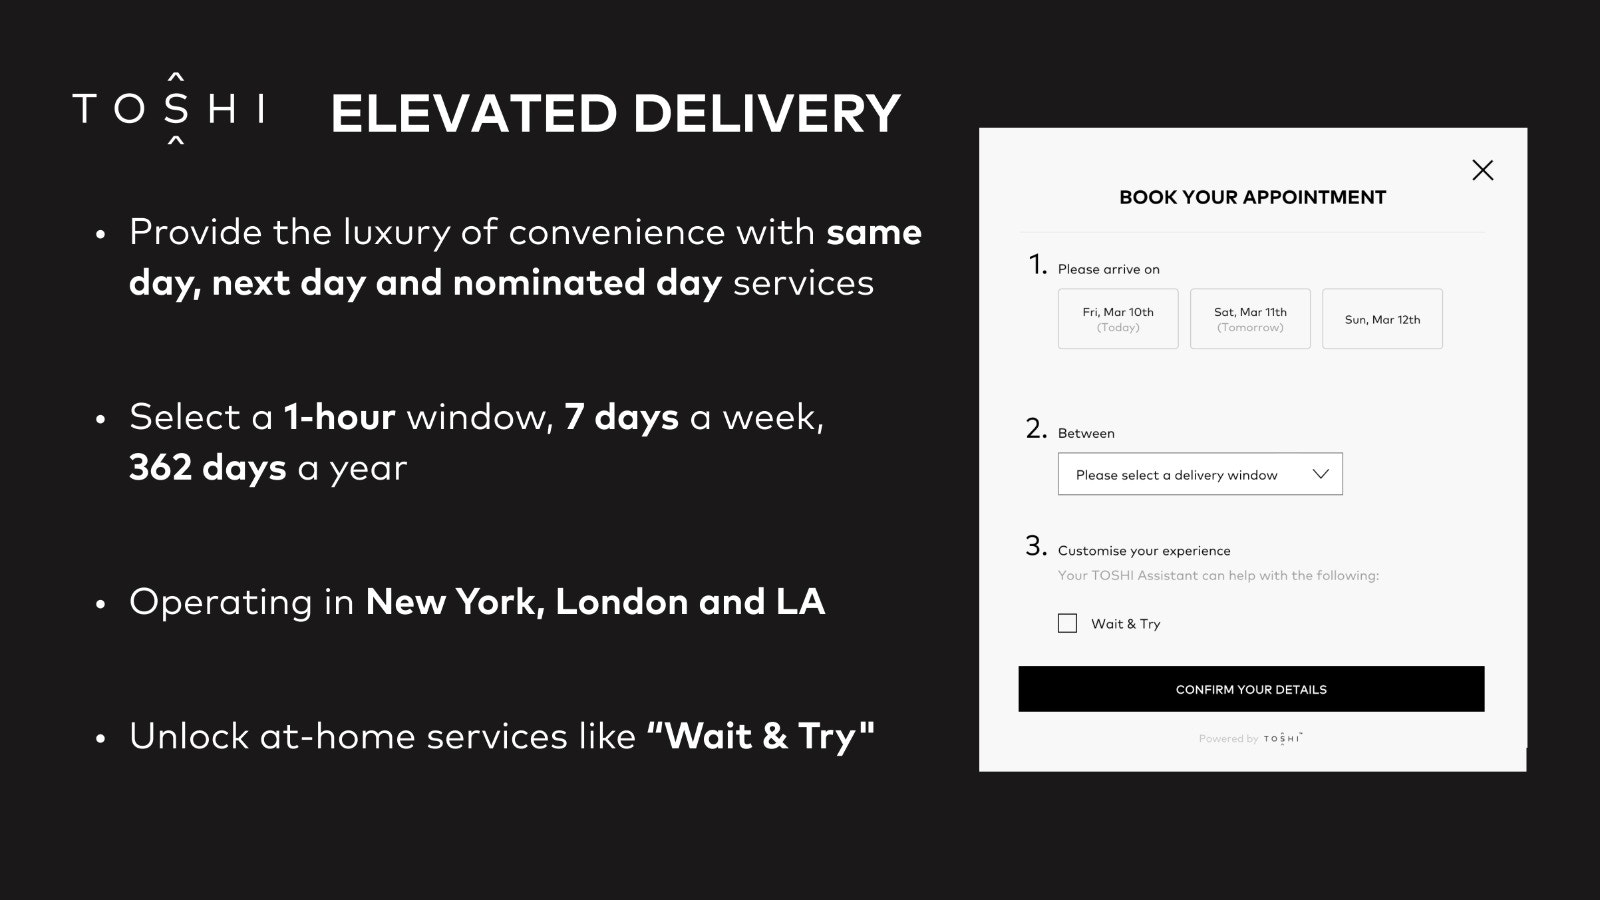 TOSHI delivery slot and additional services